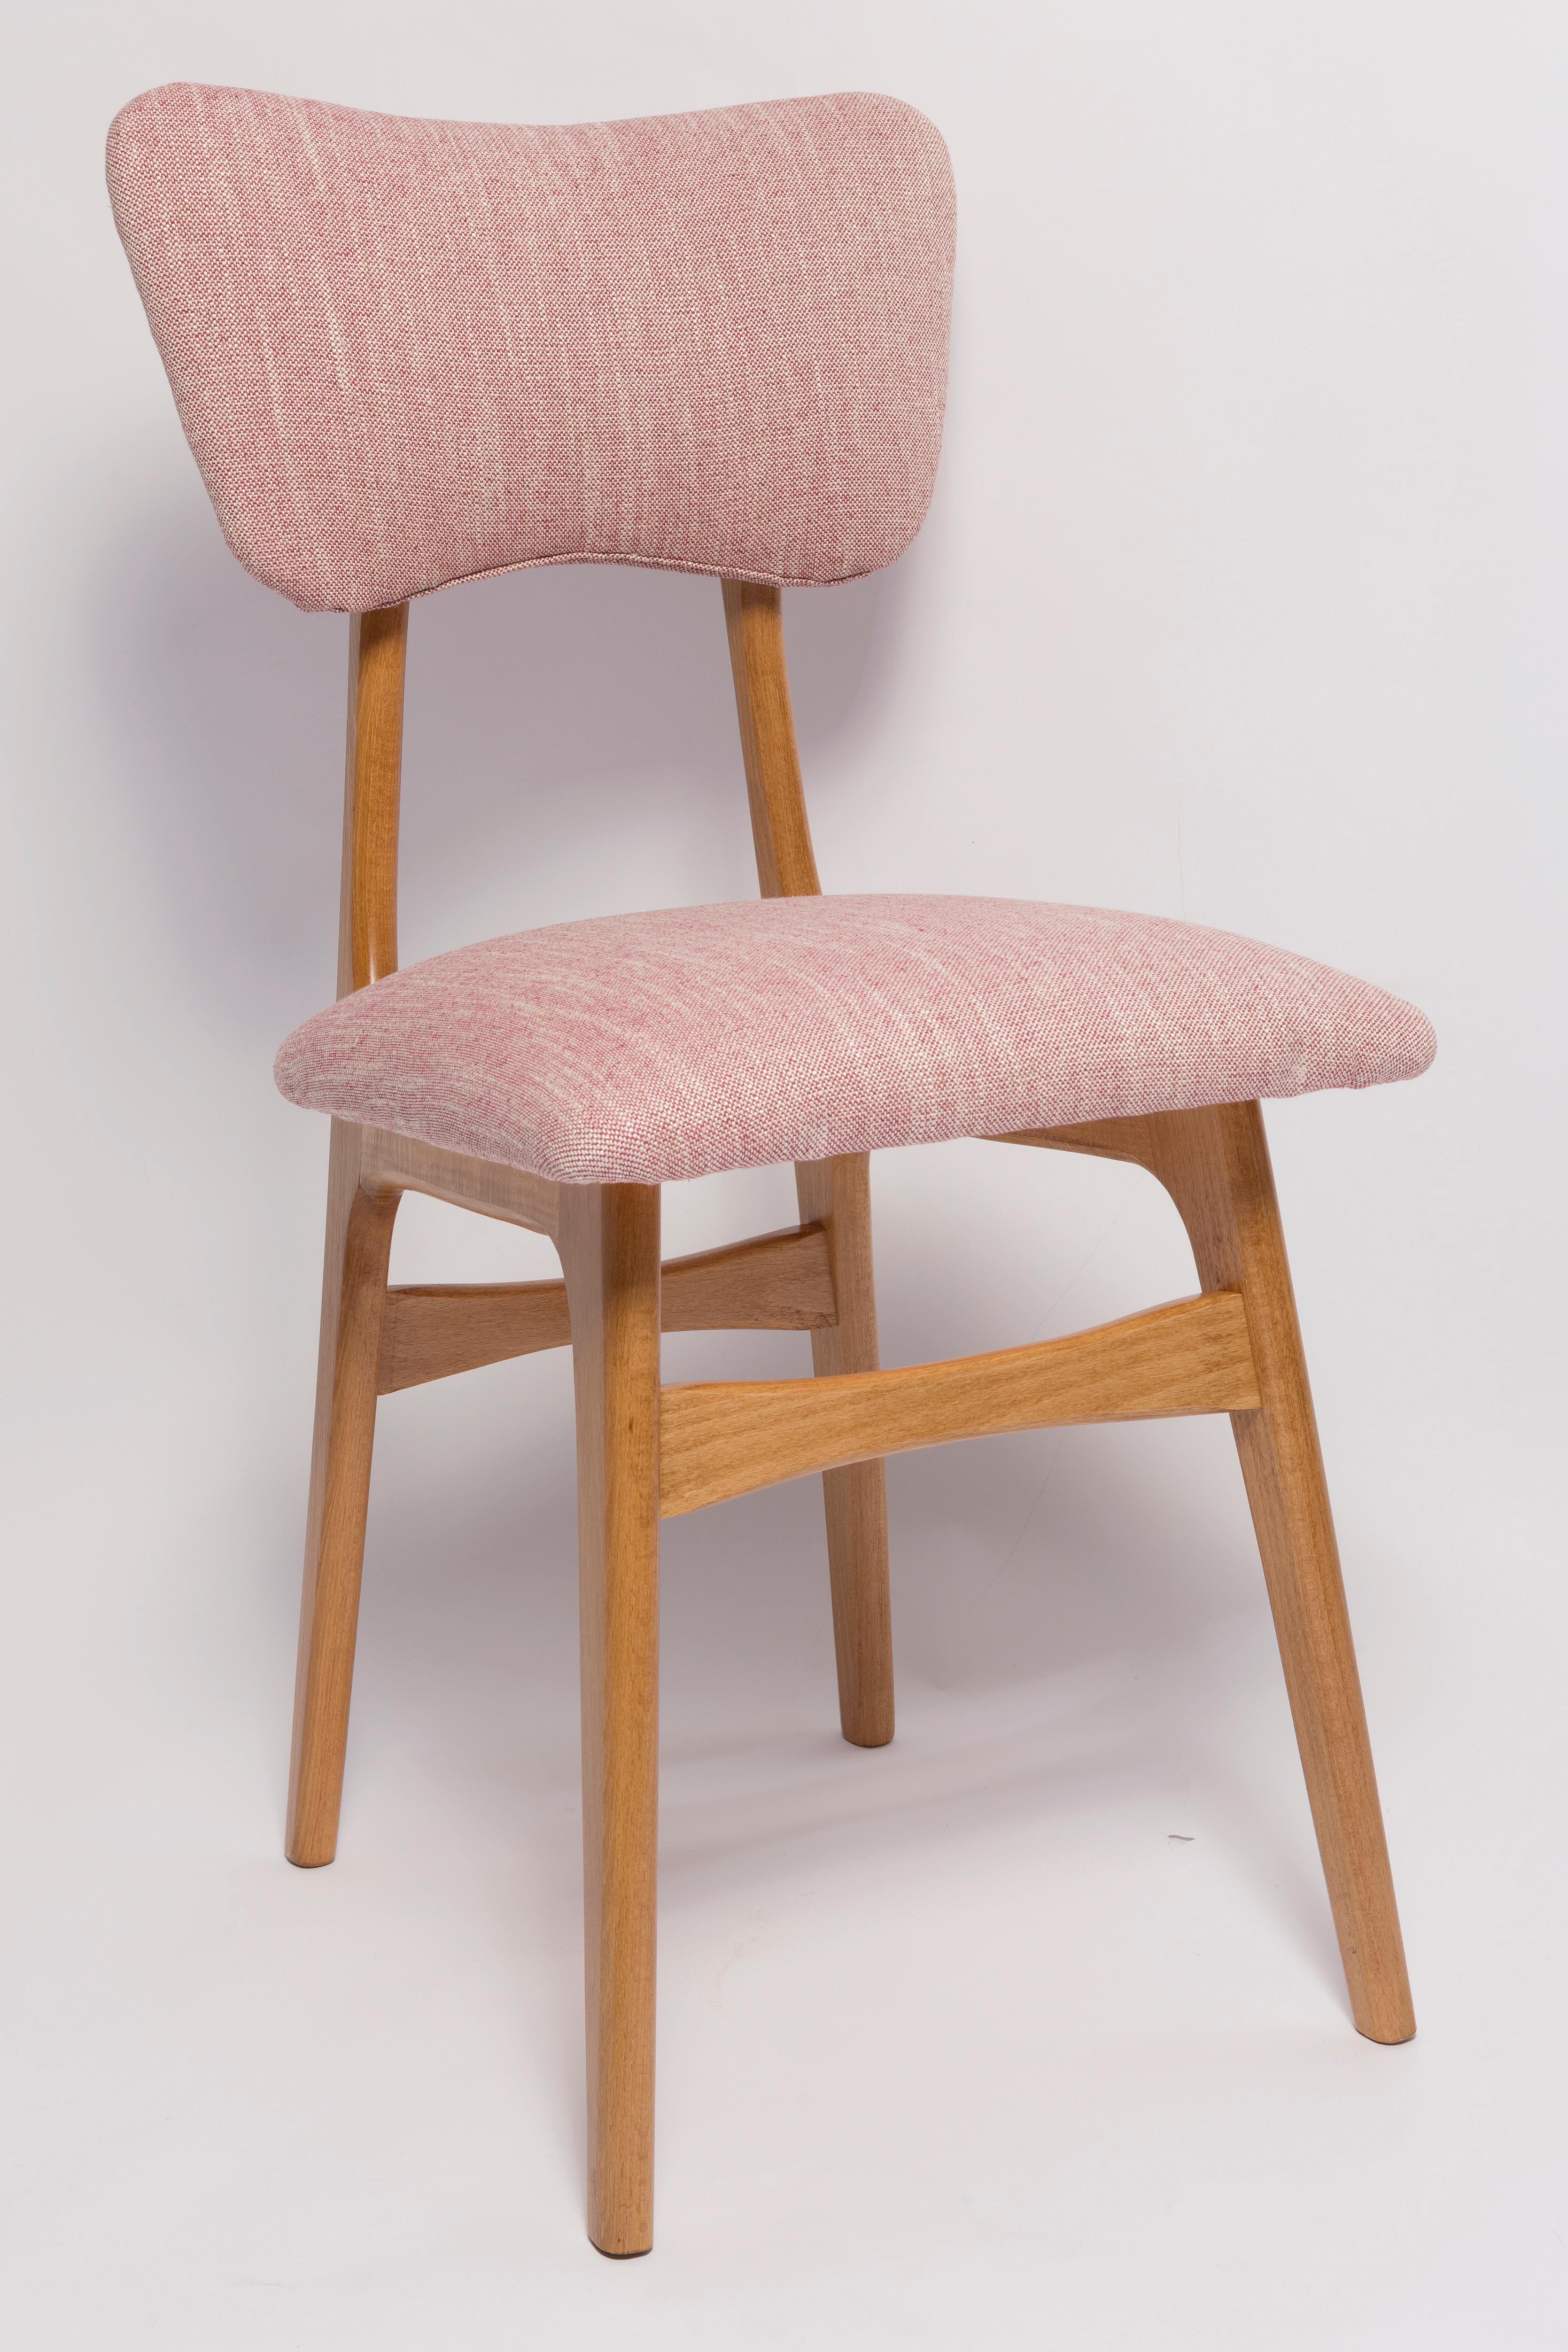 Mid-Century Modern Mid Century Butterfly Dining Chair, Pink Linen, Light Wood, Europe, 1960s For Sale